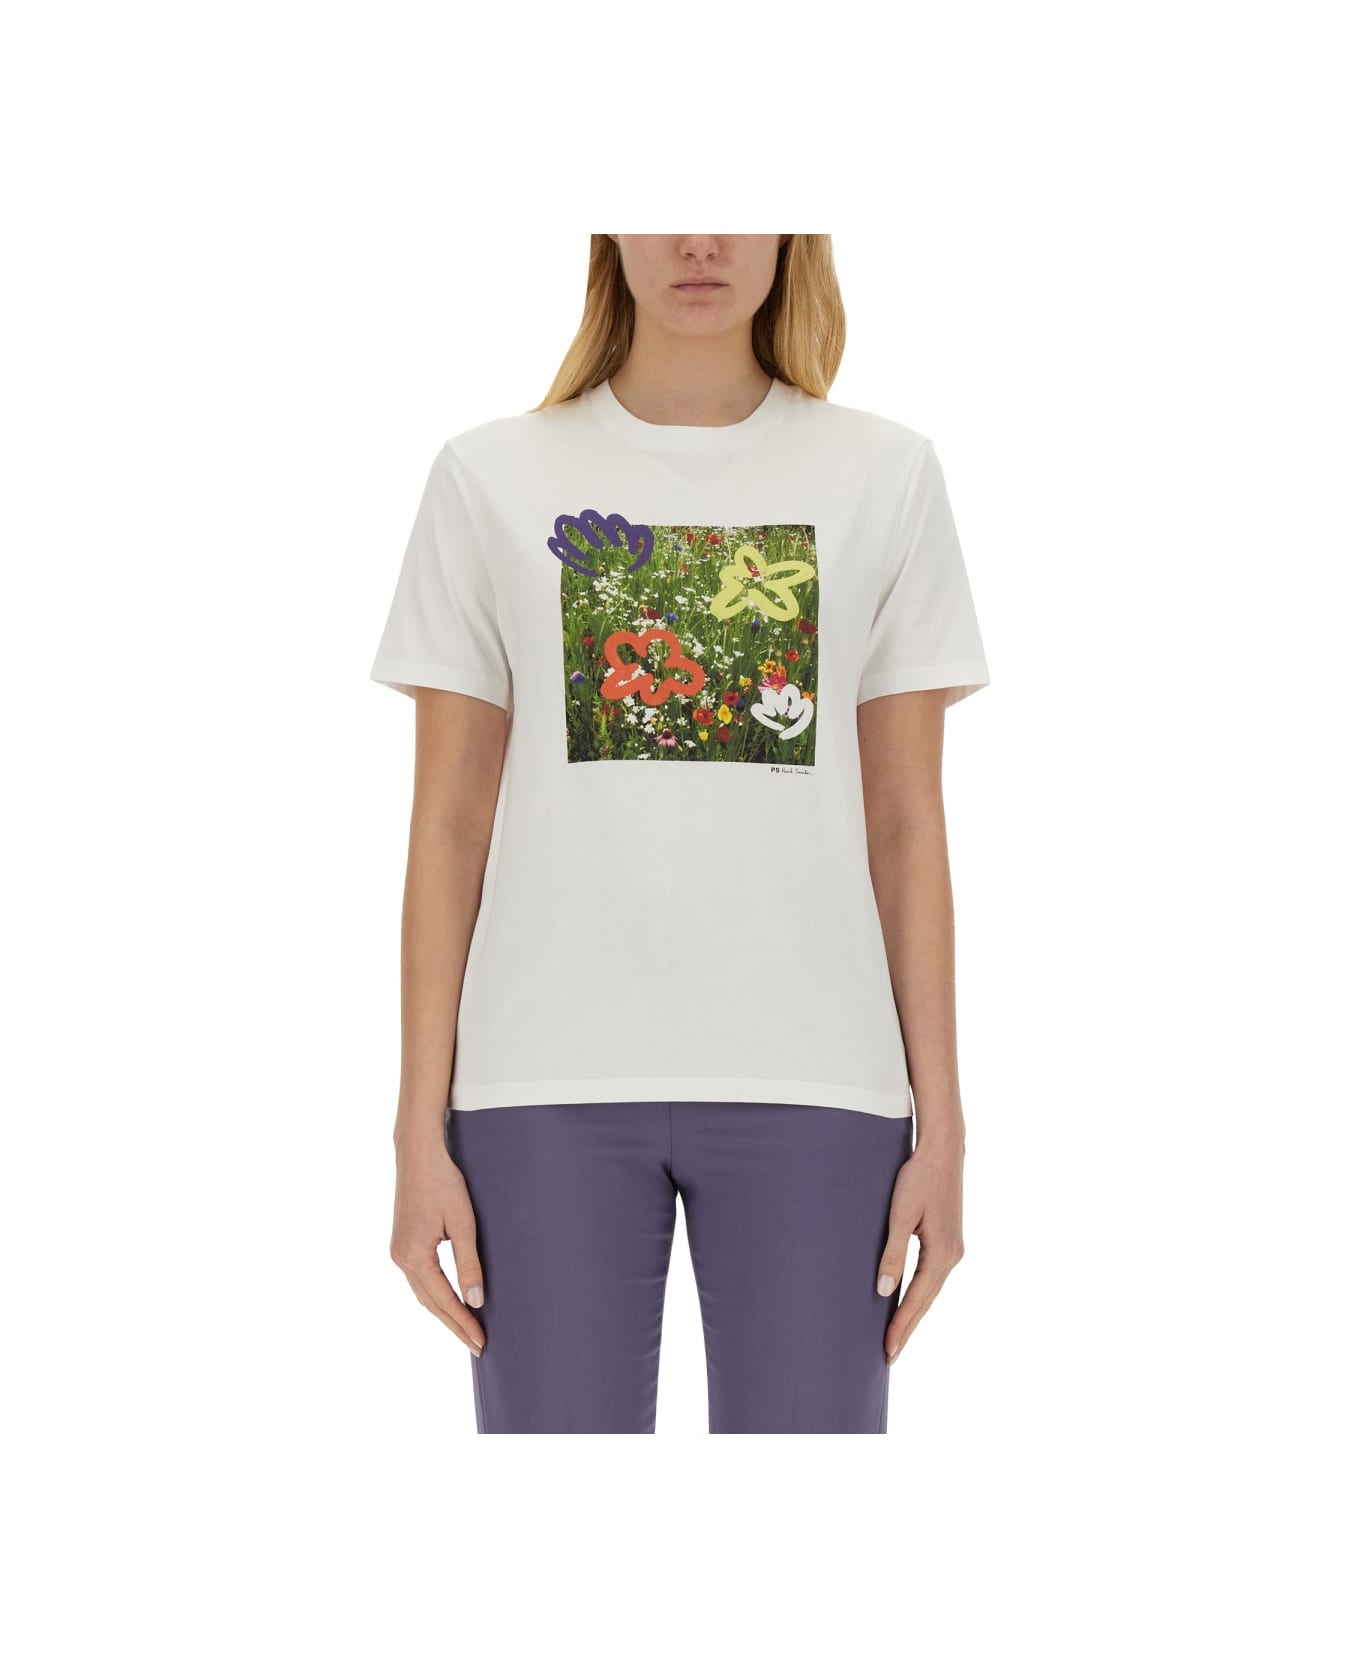 PS by Paul Smith 'wildflowers' T-shirt - WHITE Tシャツ